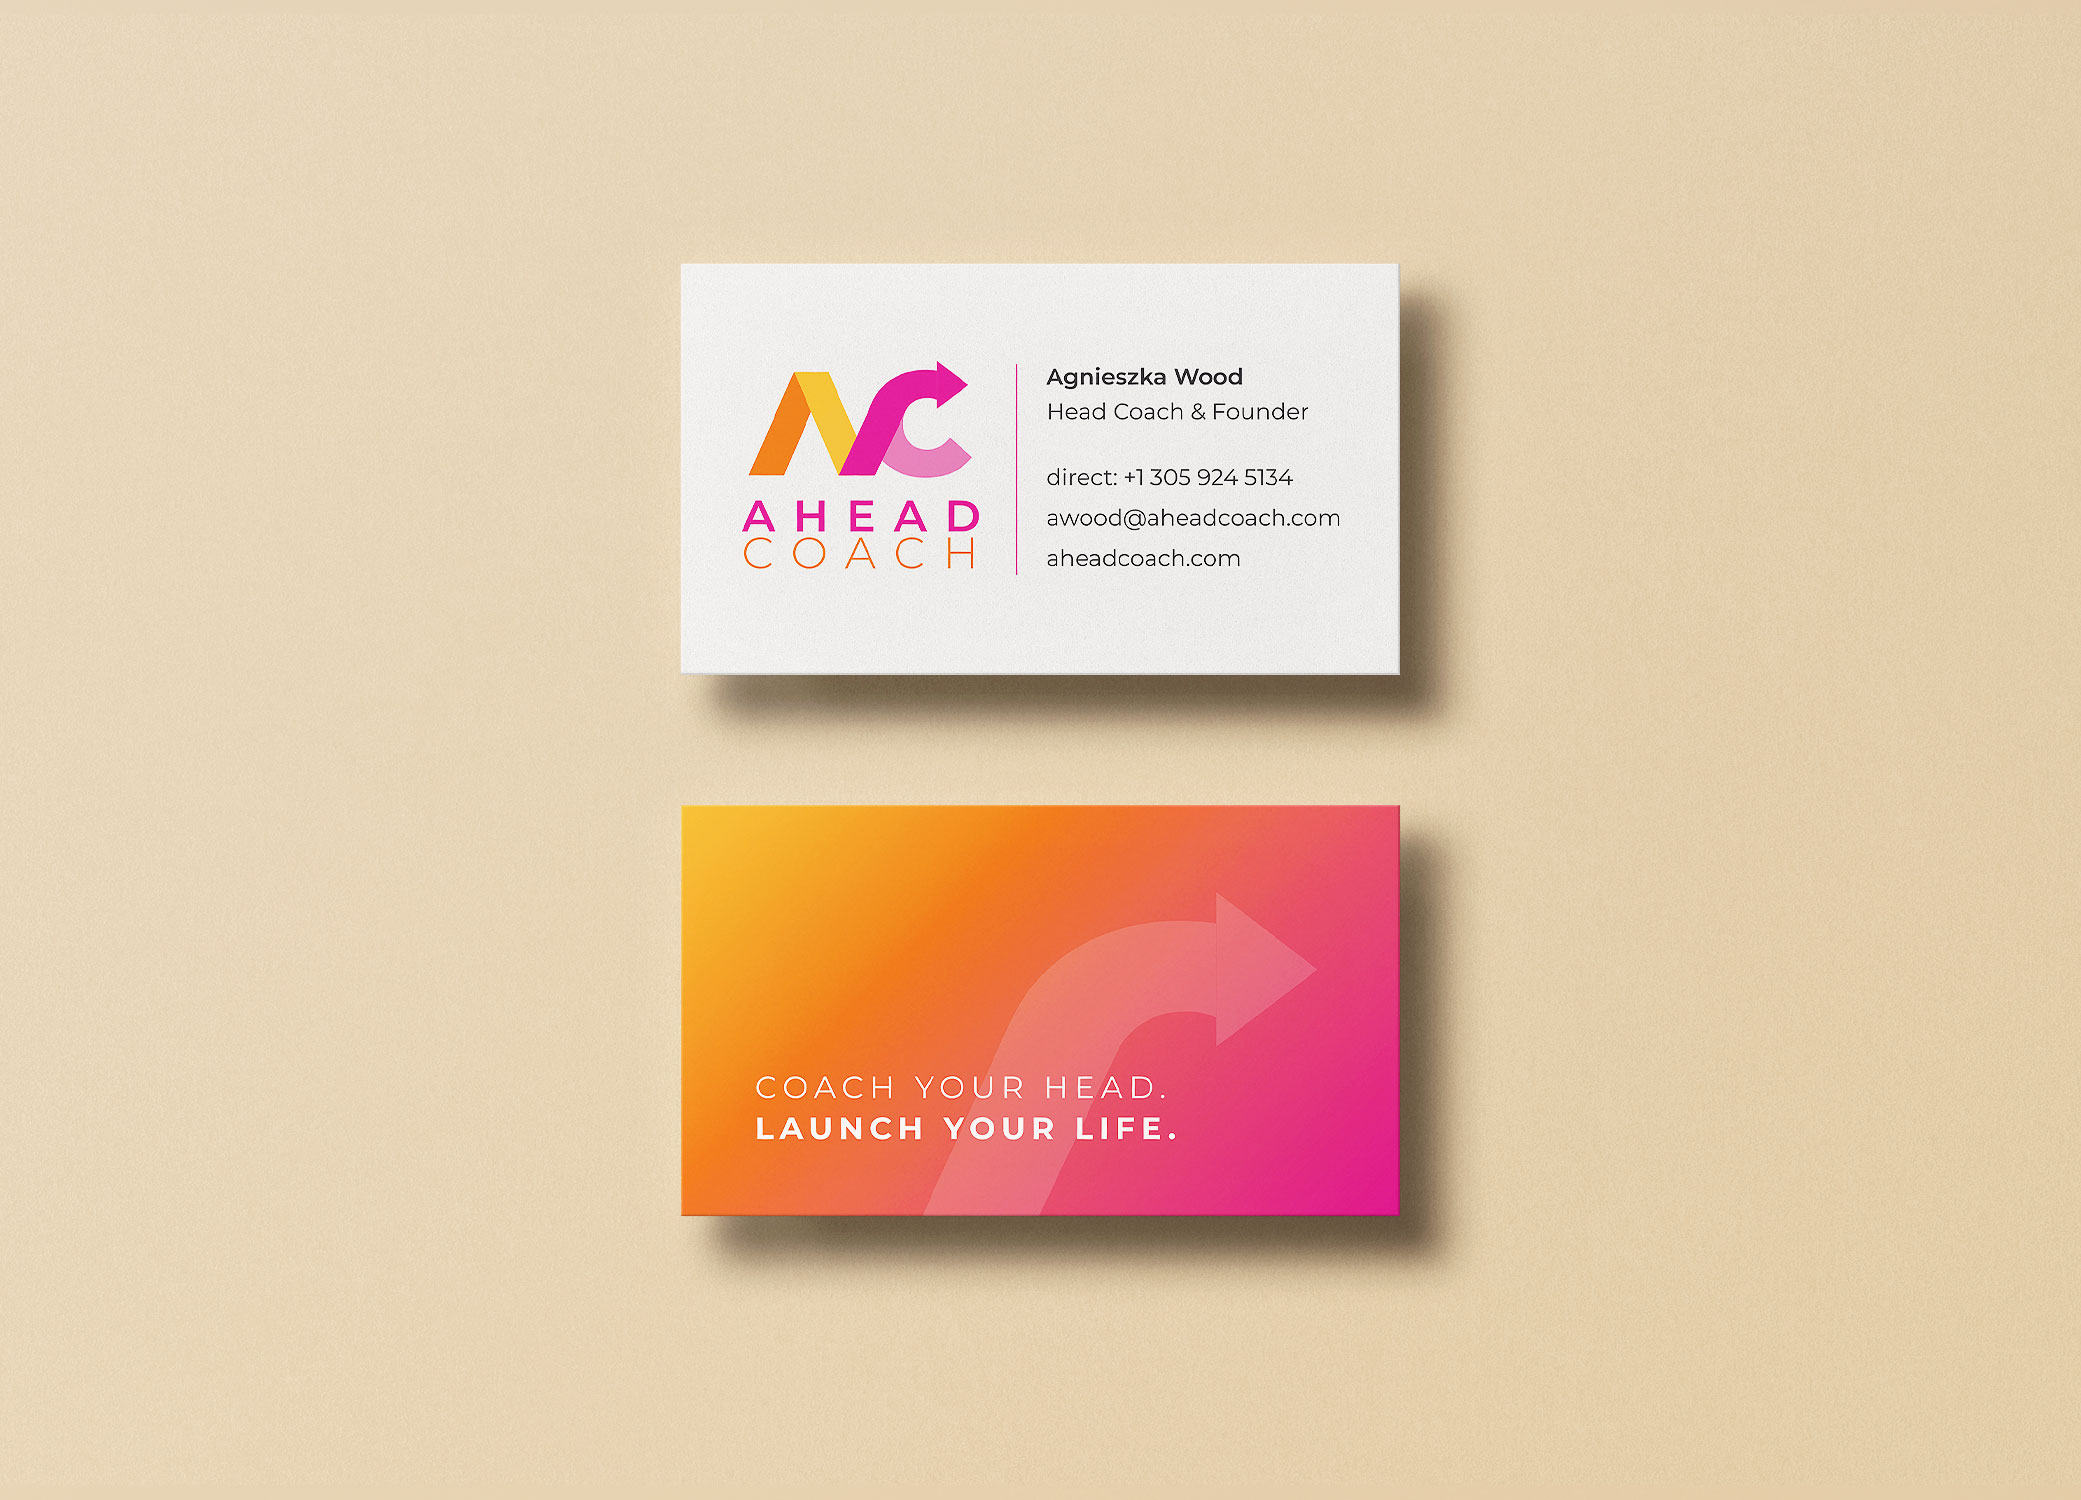 Ahead Coach business cards with logo inspired by mood boards arranged on a light peach backdrop.